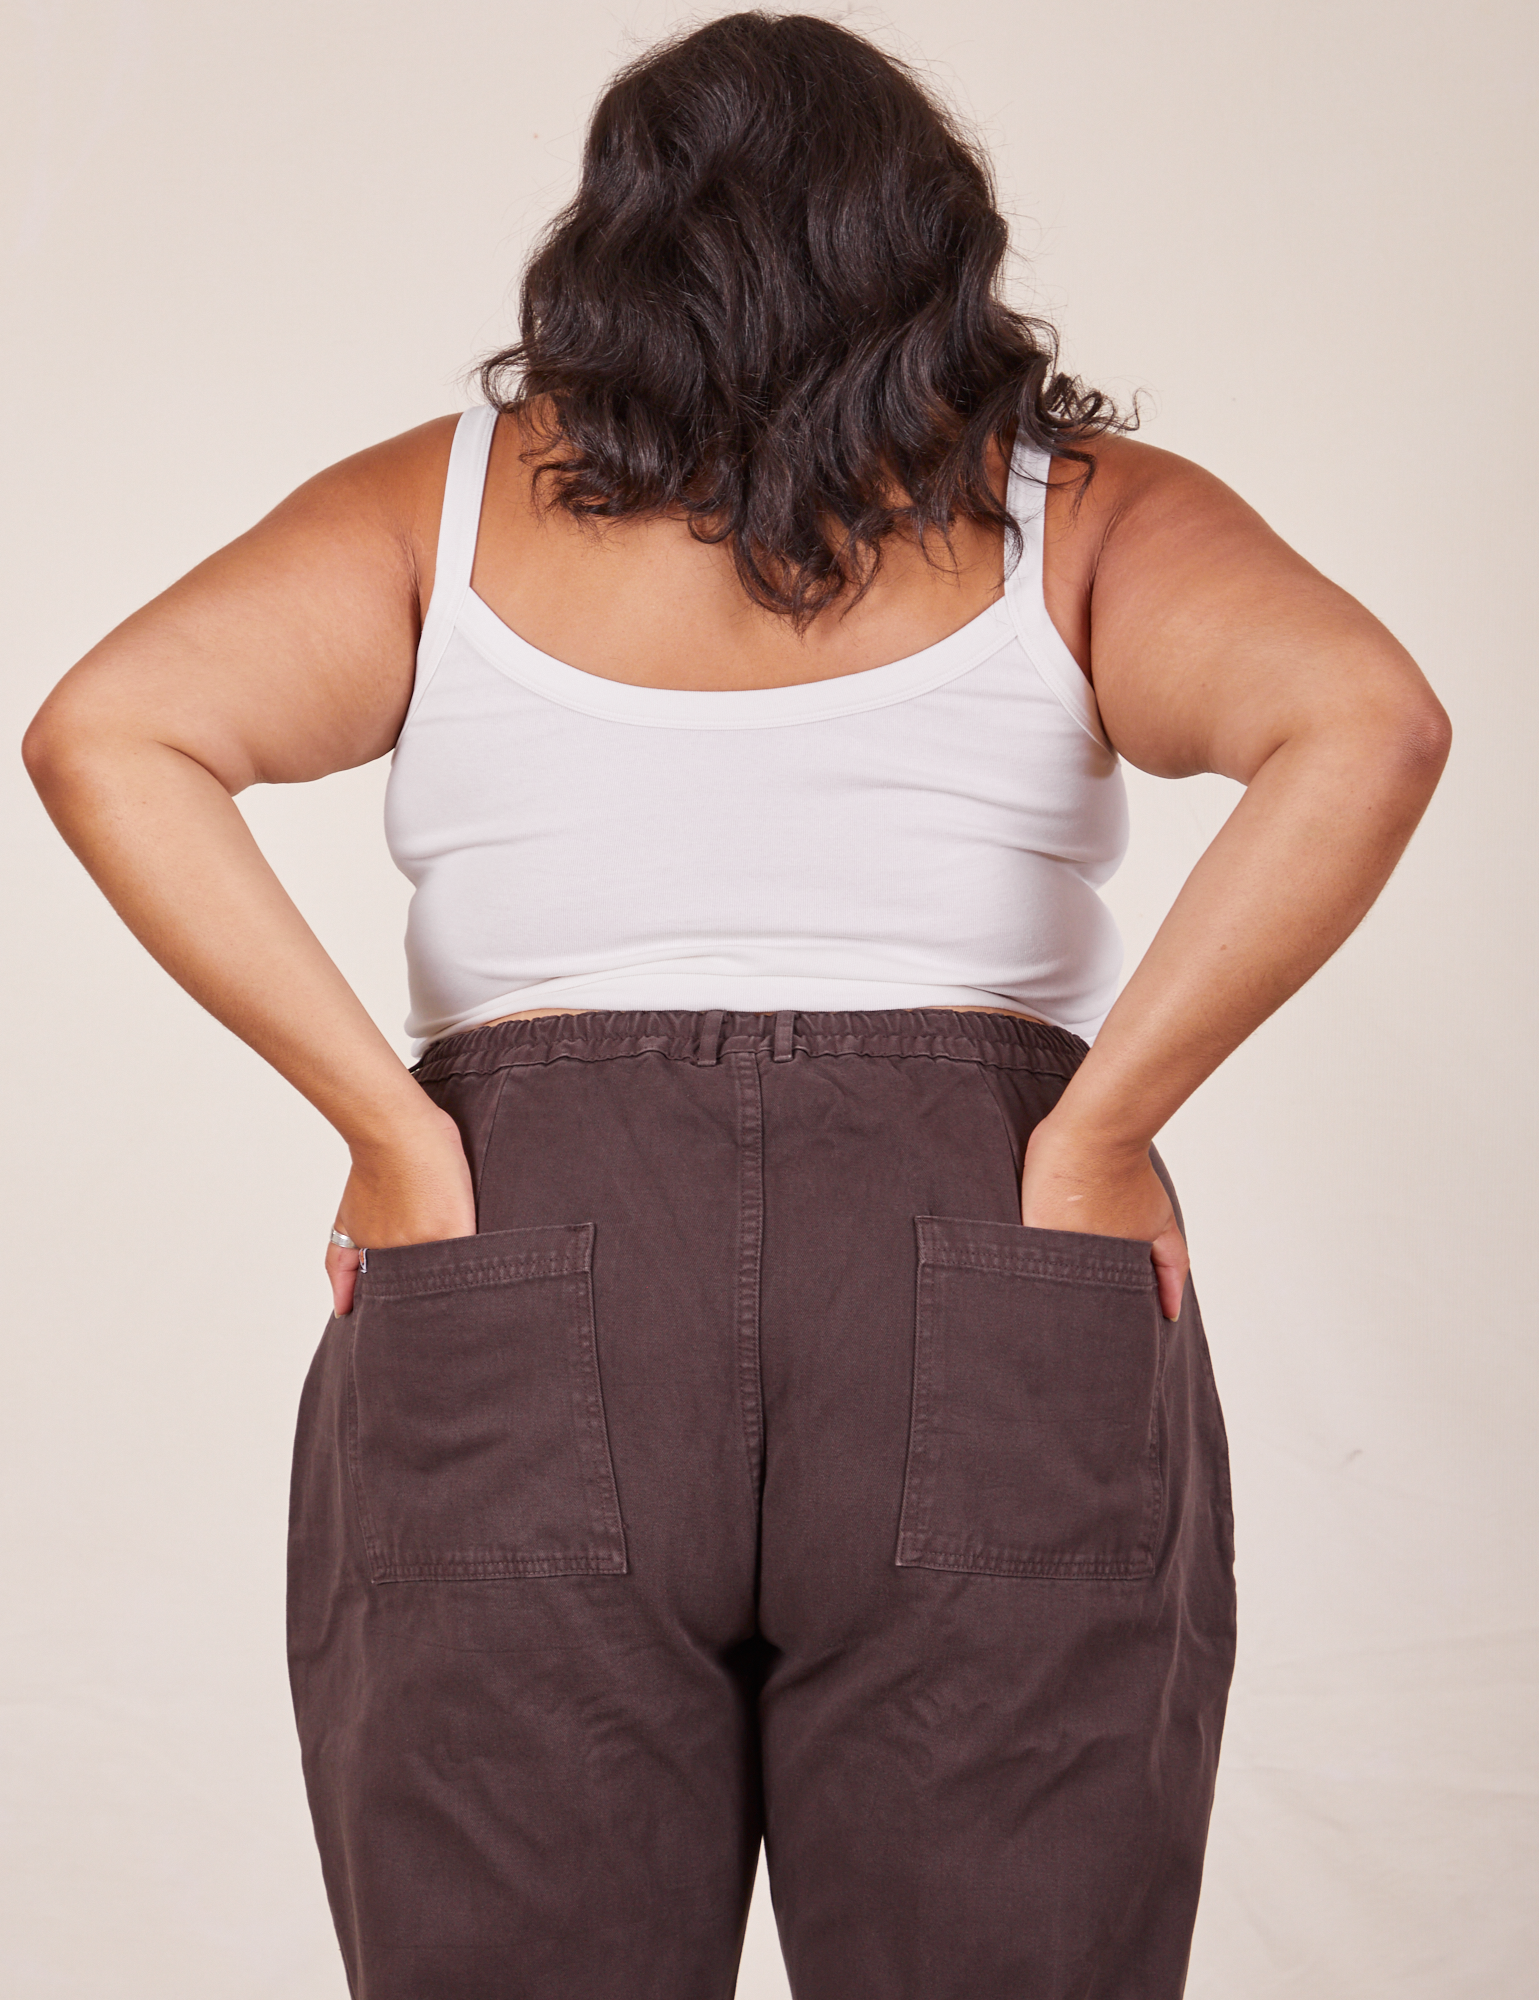 Back view of Cropped Cami in Vintage Tee Off-White and espresso brown Western Pants worn by Alicia. She has both her hands in the back pant pocket.